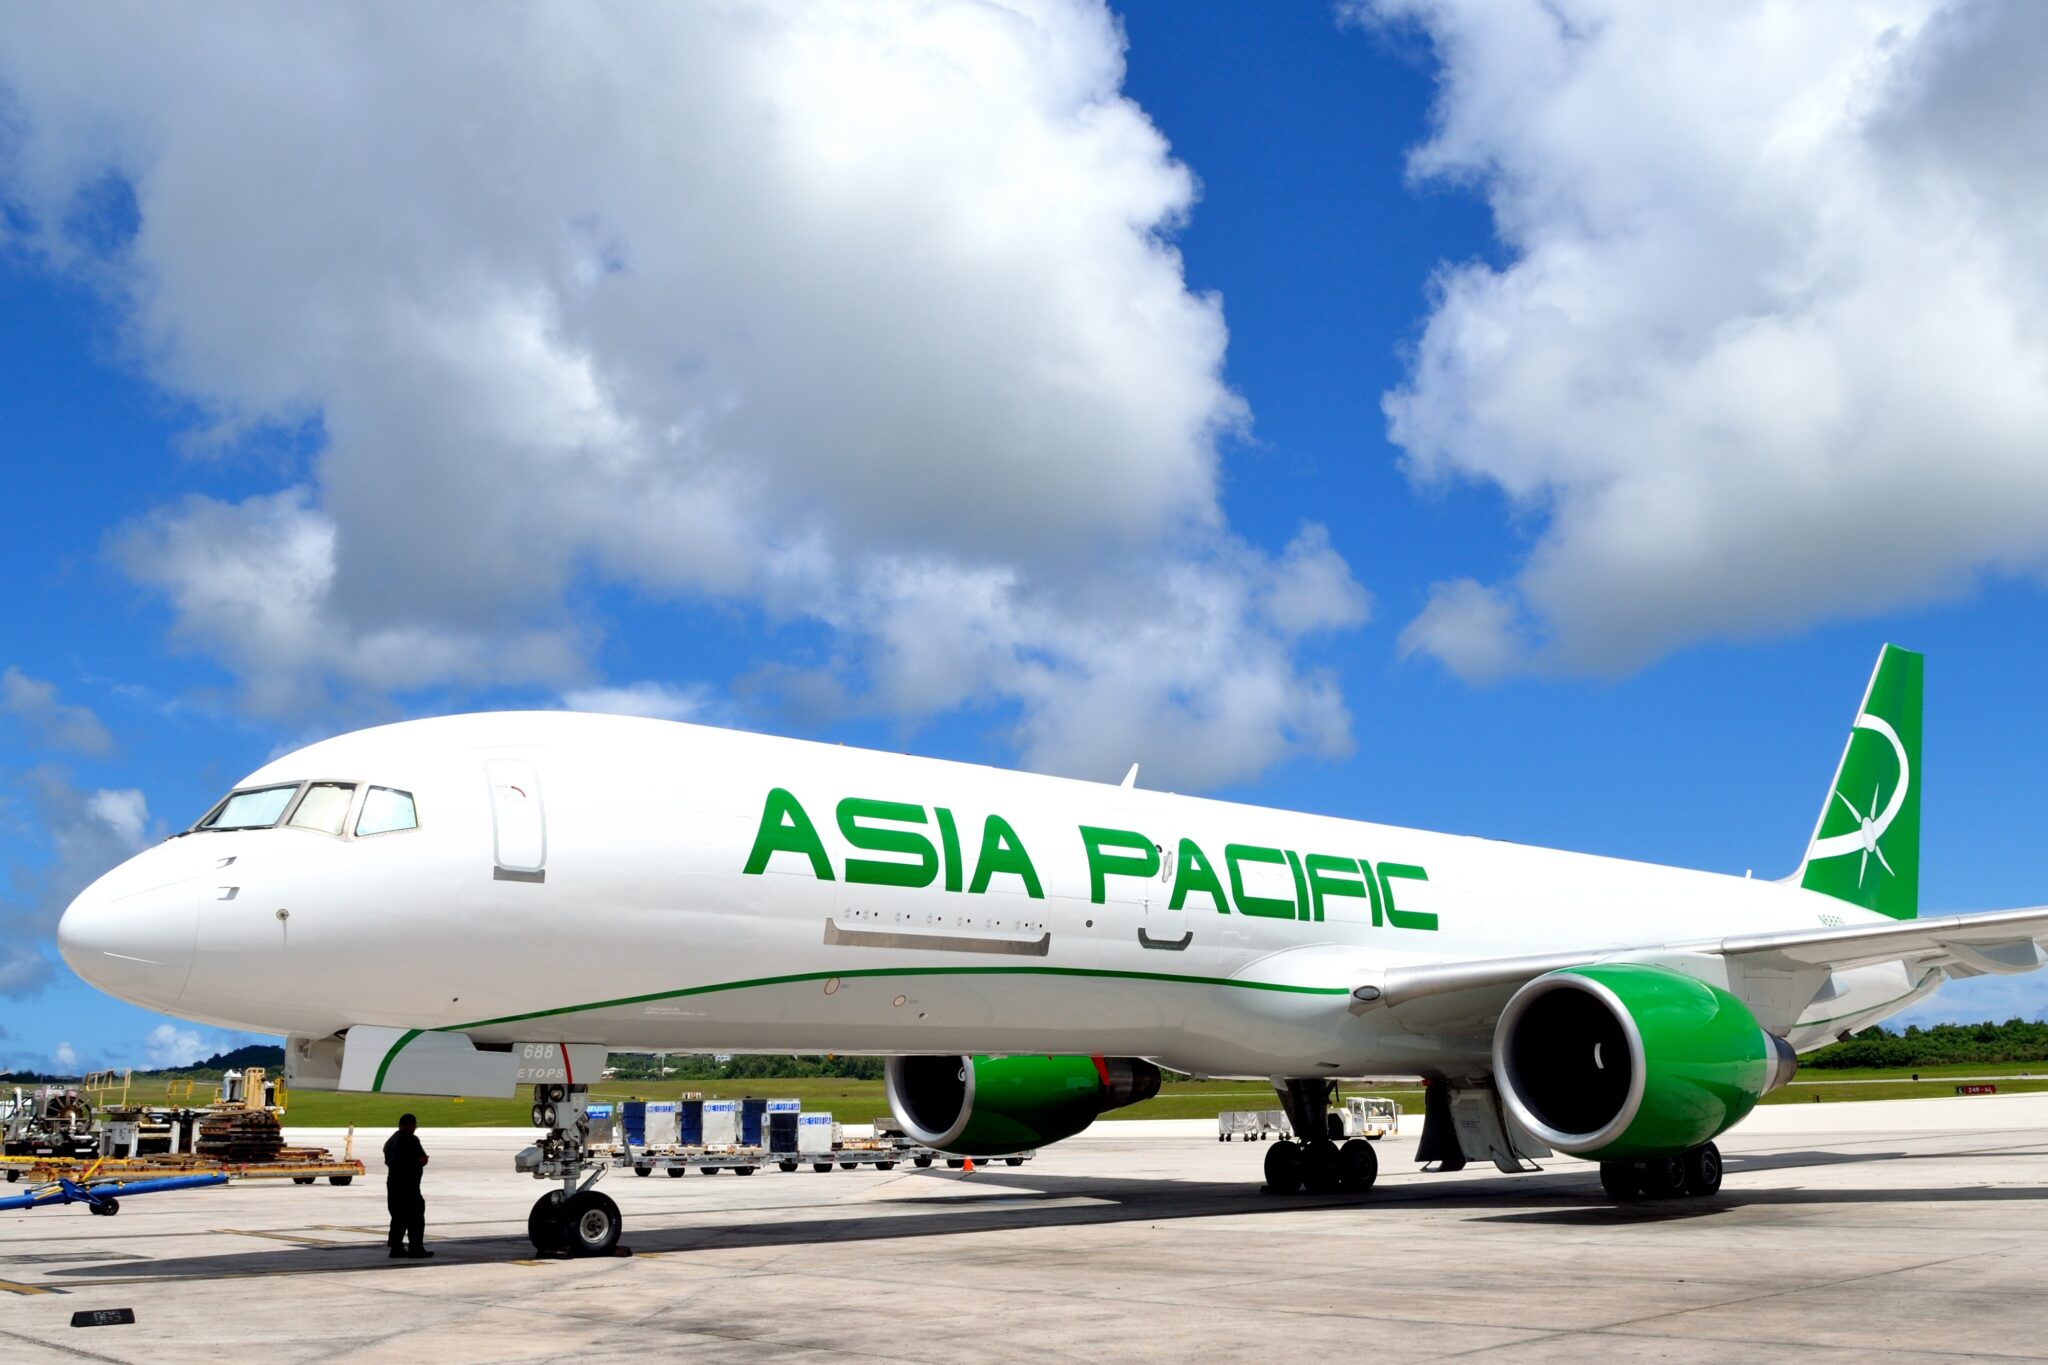 Photo: Asia Pacific Airlines